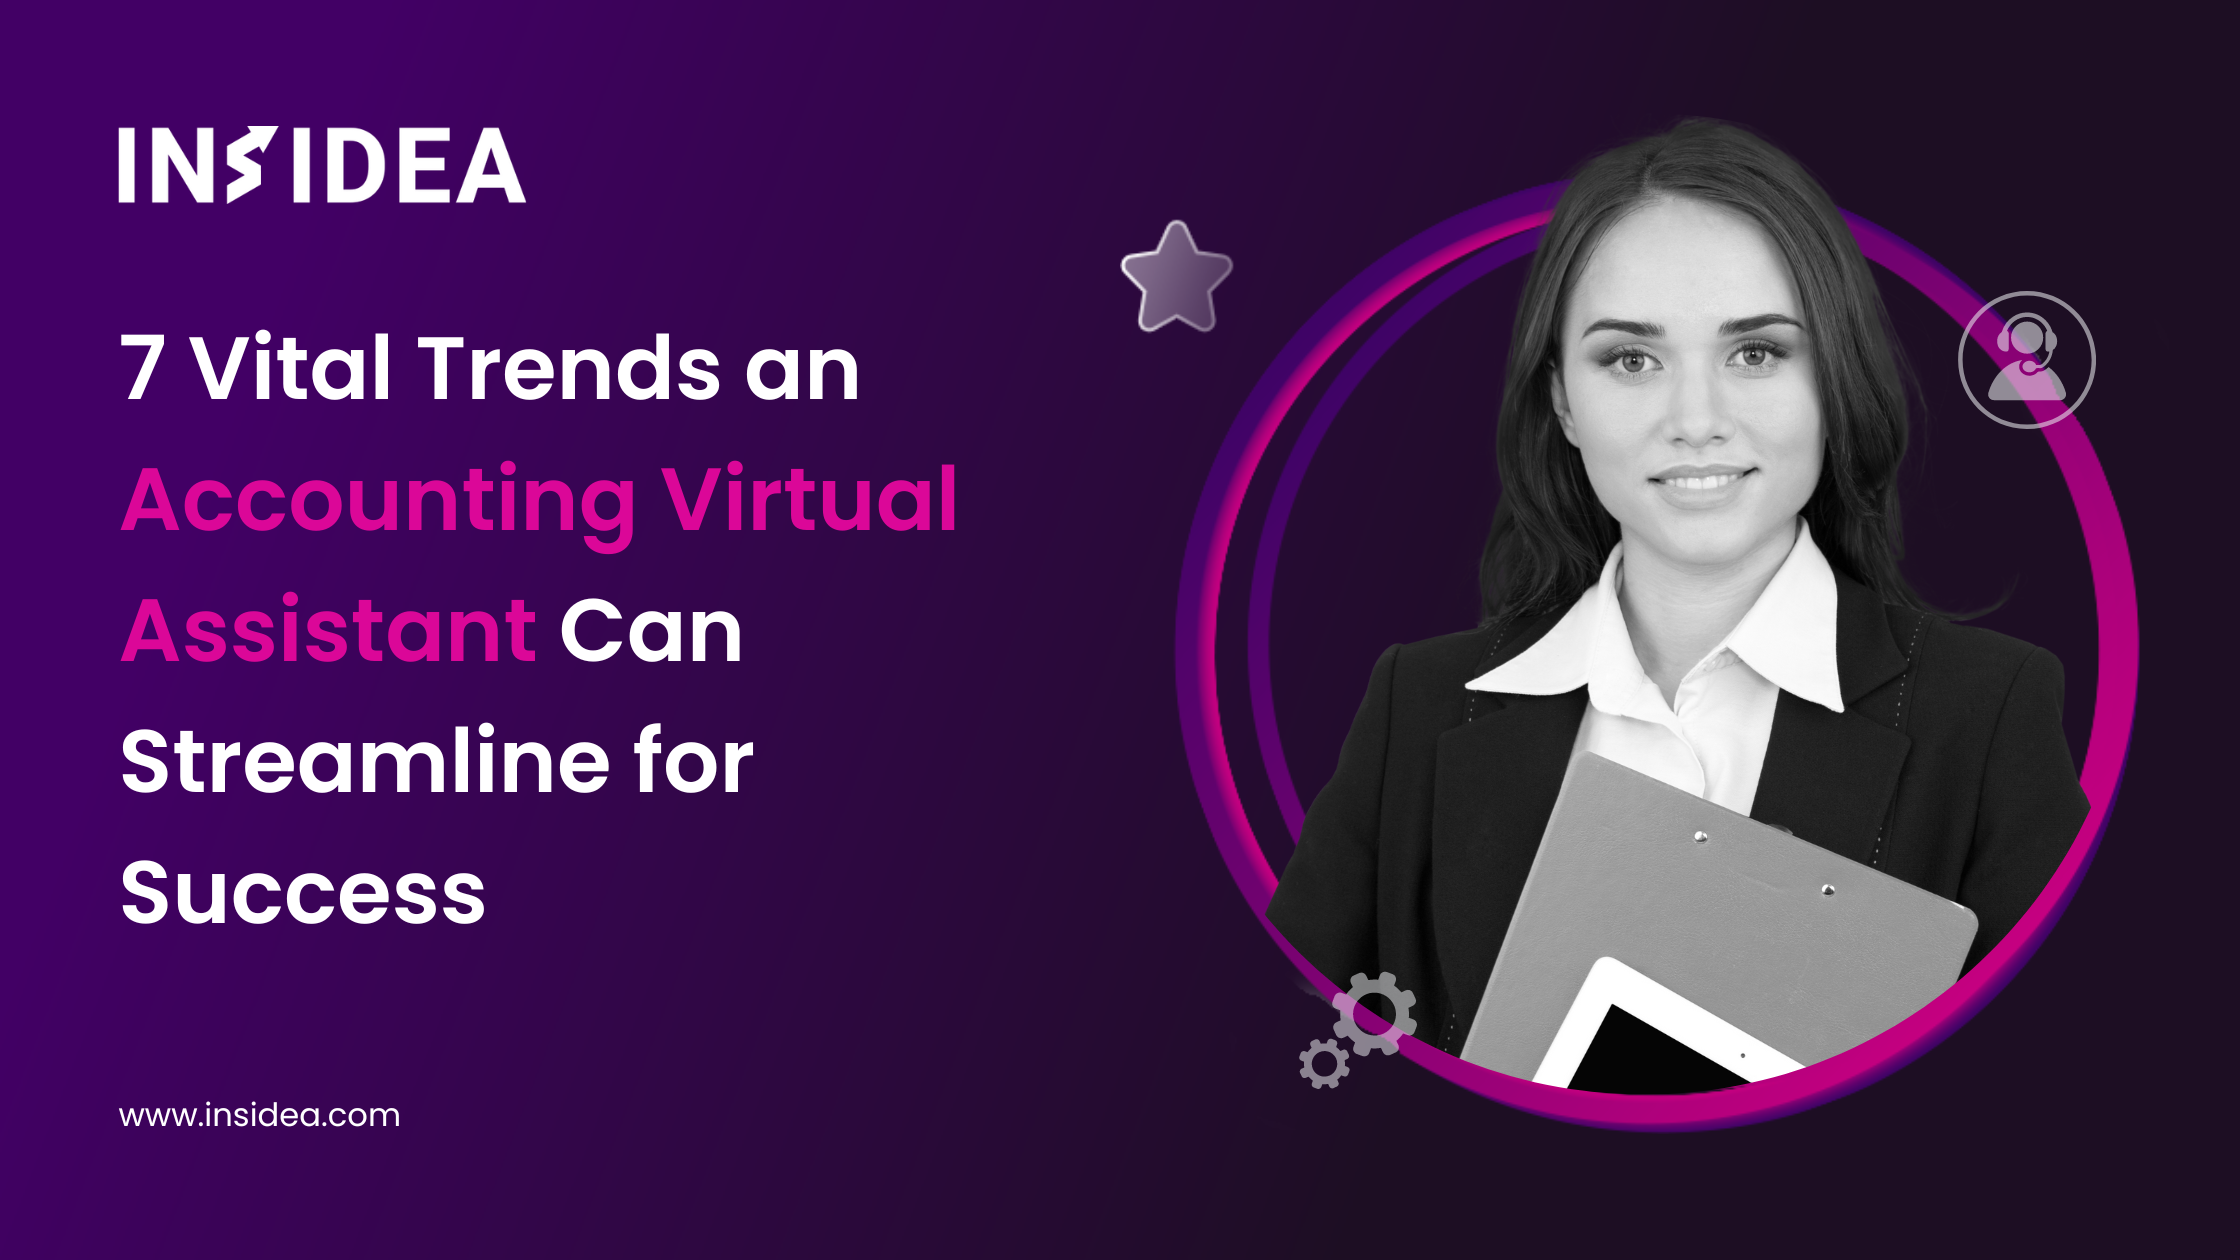 7 Vital Trends an Accounting Virtual Assistant Can Streamline for Success